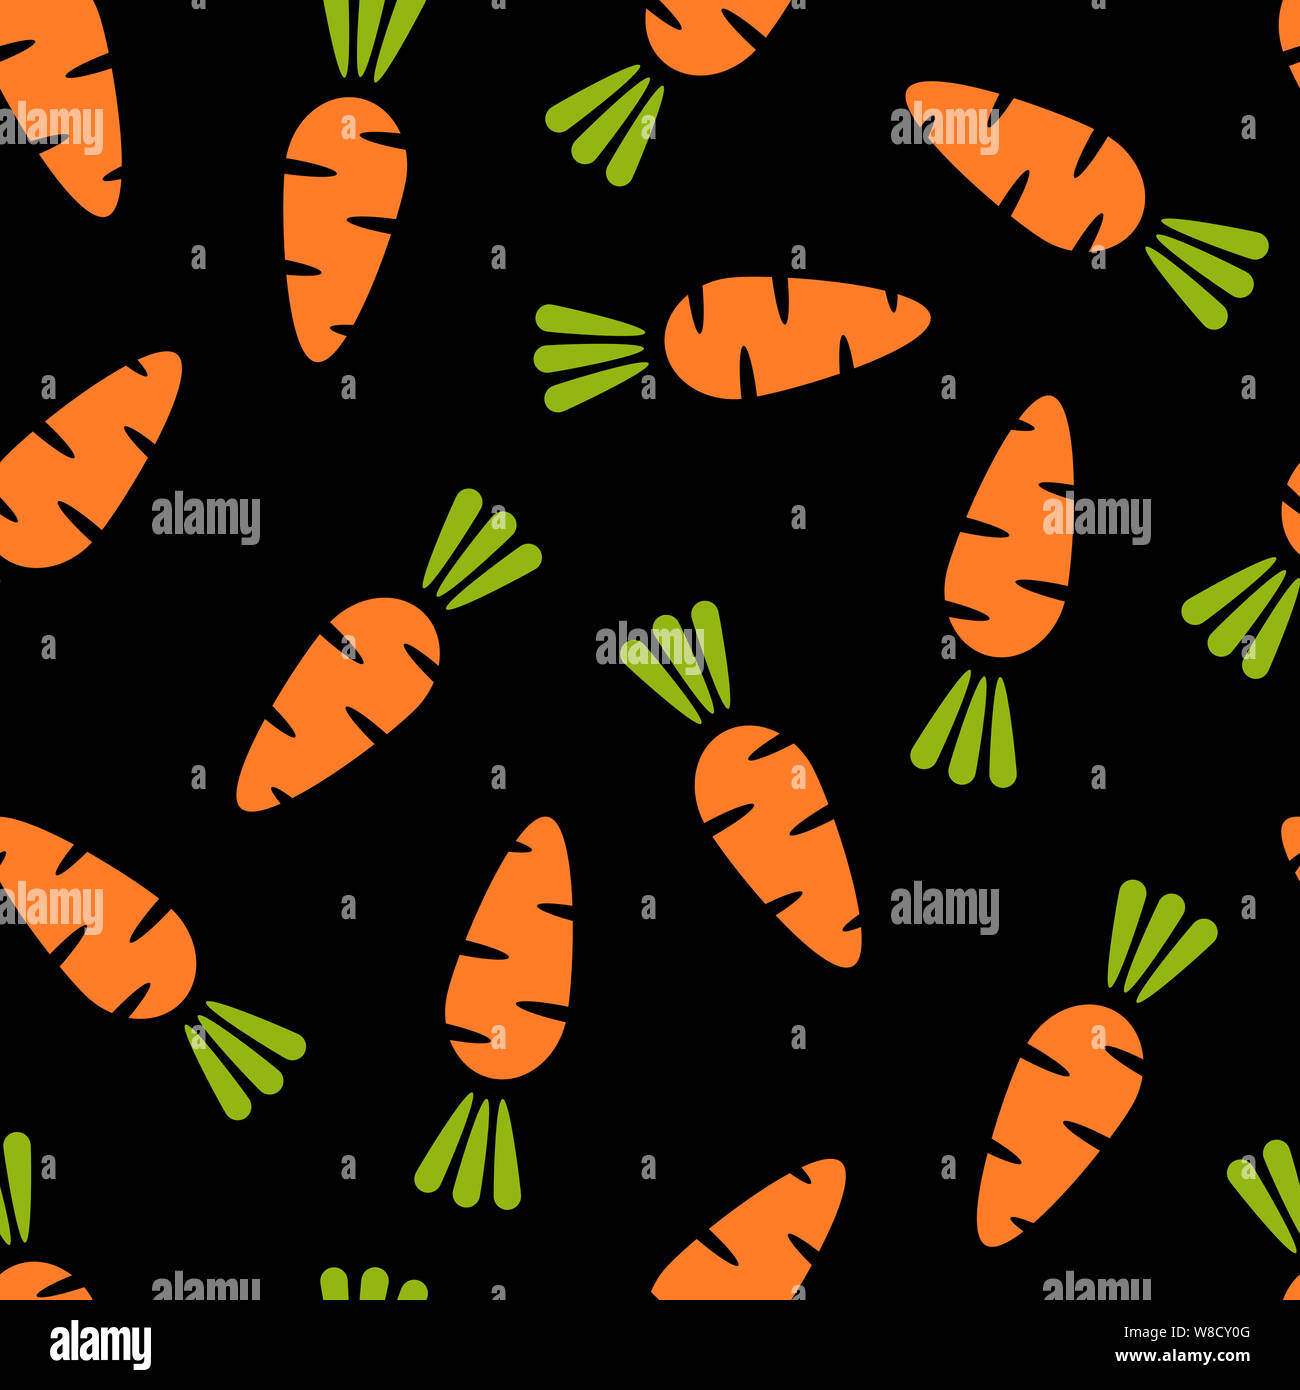 Carrot seamless vegetable background flat illustration. Fresh food background in black and orange colors with carrot vegetable seamless element for healthy diet decor or vegan fabric print. Stock Photo